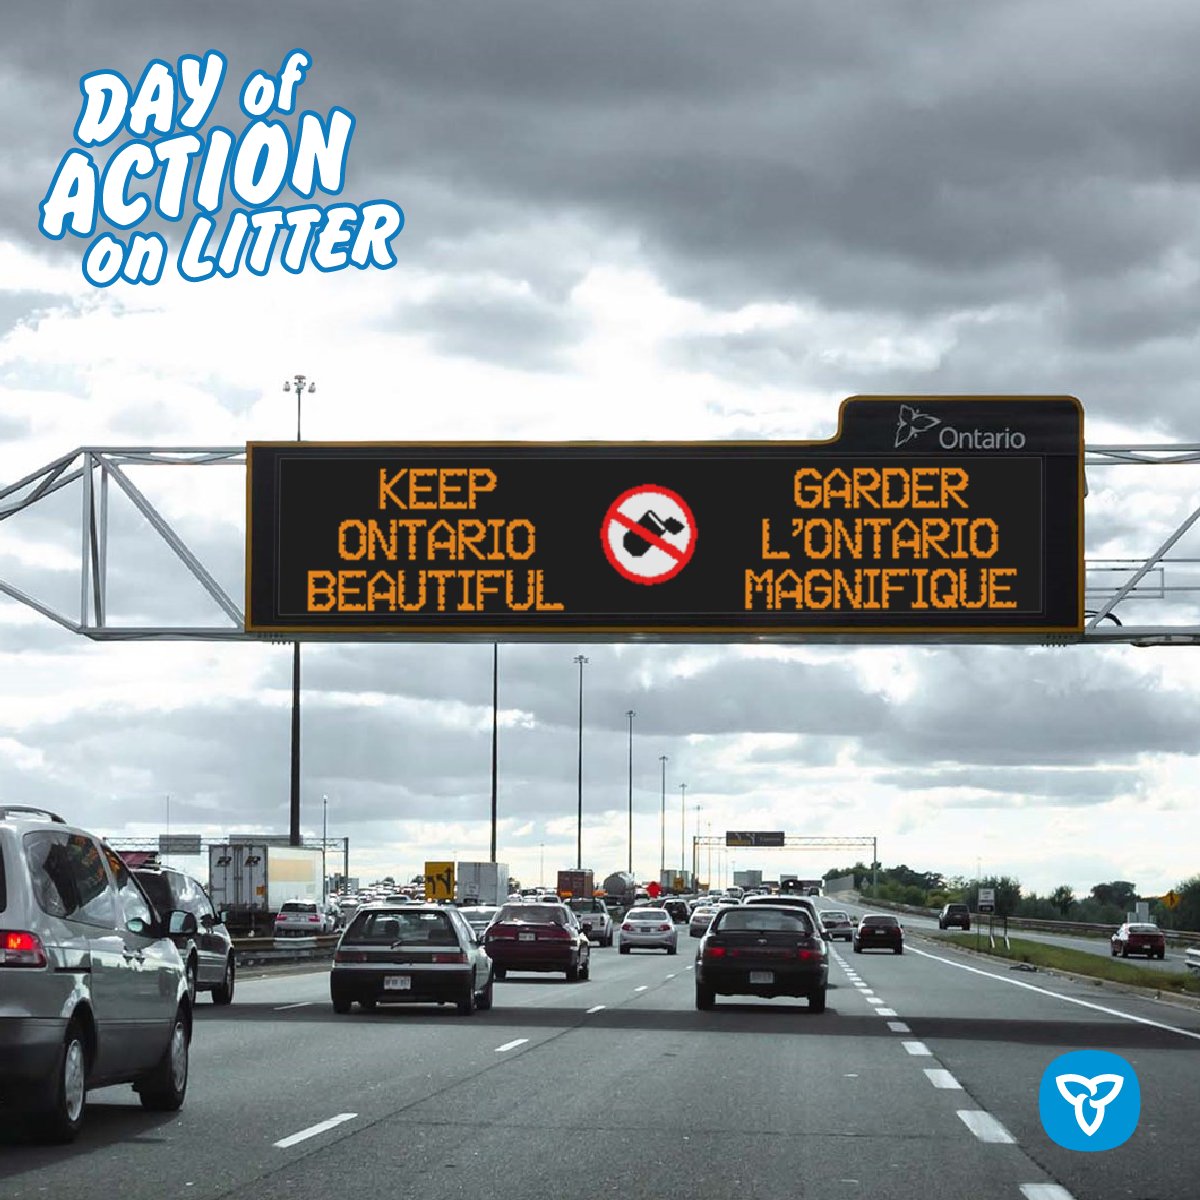 Keep our roads and highways litter-free: 🚗 do not throw trash out the window! Take it home with you for proper disposal 🚗 keep your yard clean as trash can blow onto the street #ActONLitter #ReduceWaste #ReducePlasticWaste #WasteFree #KeepRoadsClean